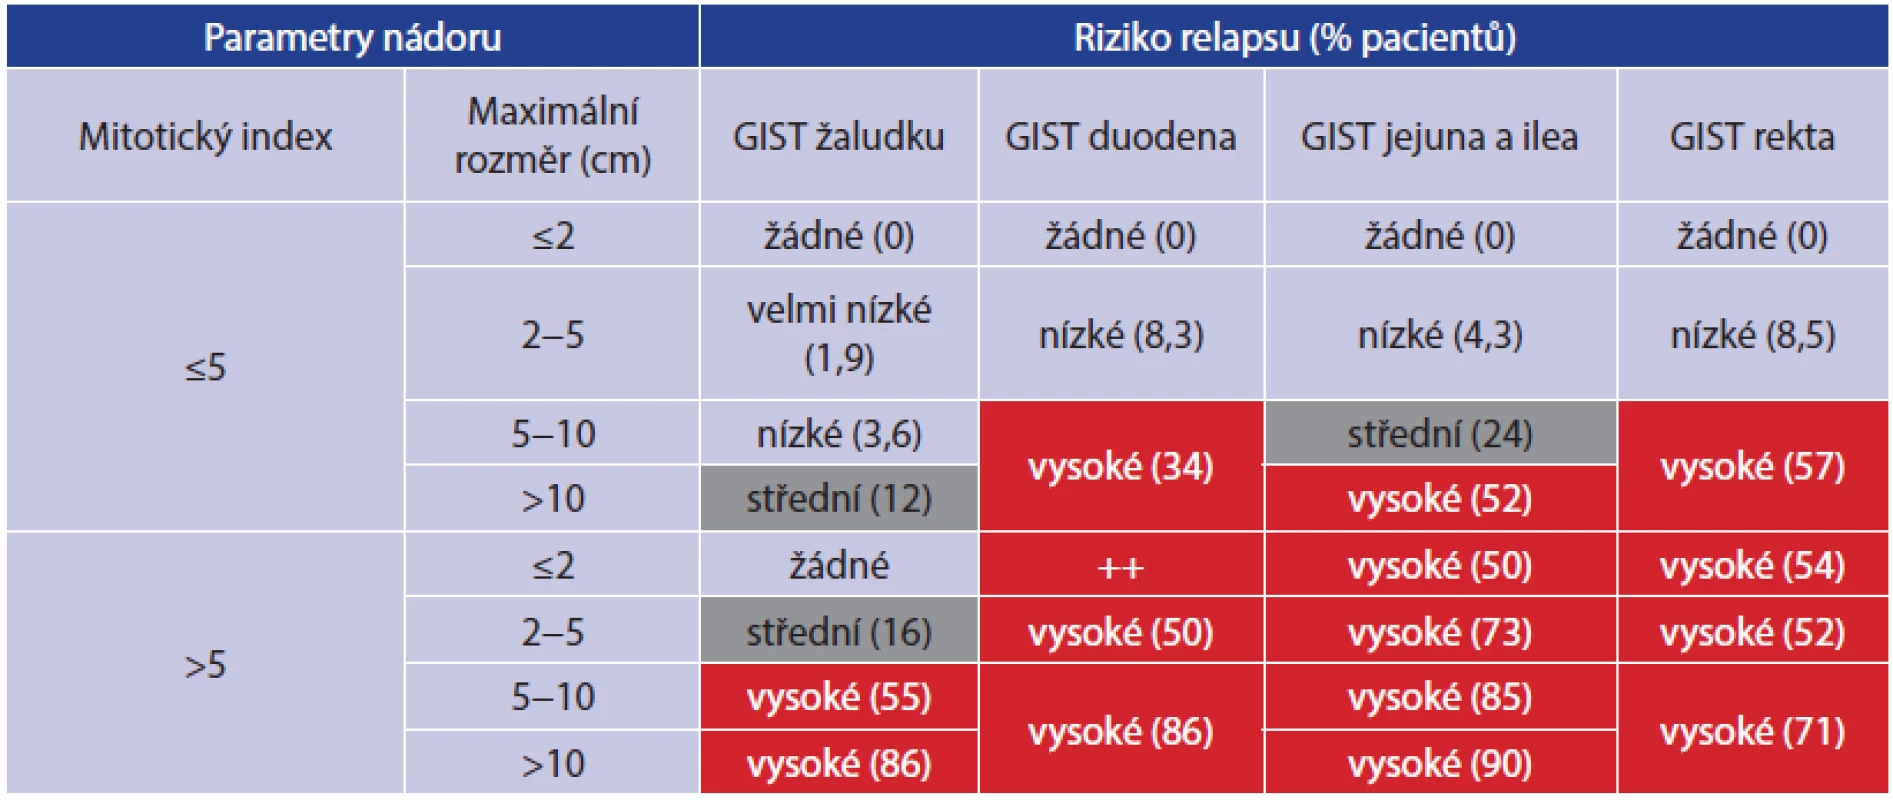 Dělení rizika relapsu GIST, volně dle ESMO guidelines 2012 [17]
Tab. 1: The risk of GIST recurrence, according to ESMO guidelines 2012 [17]